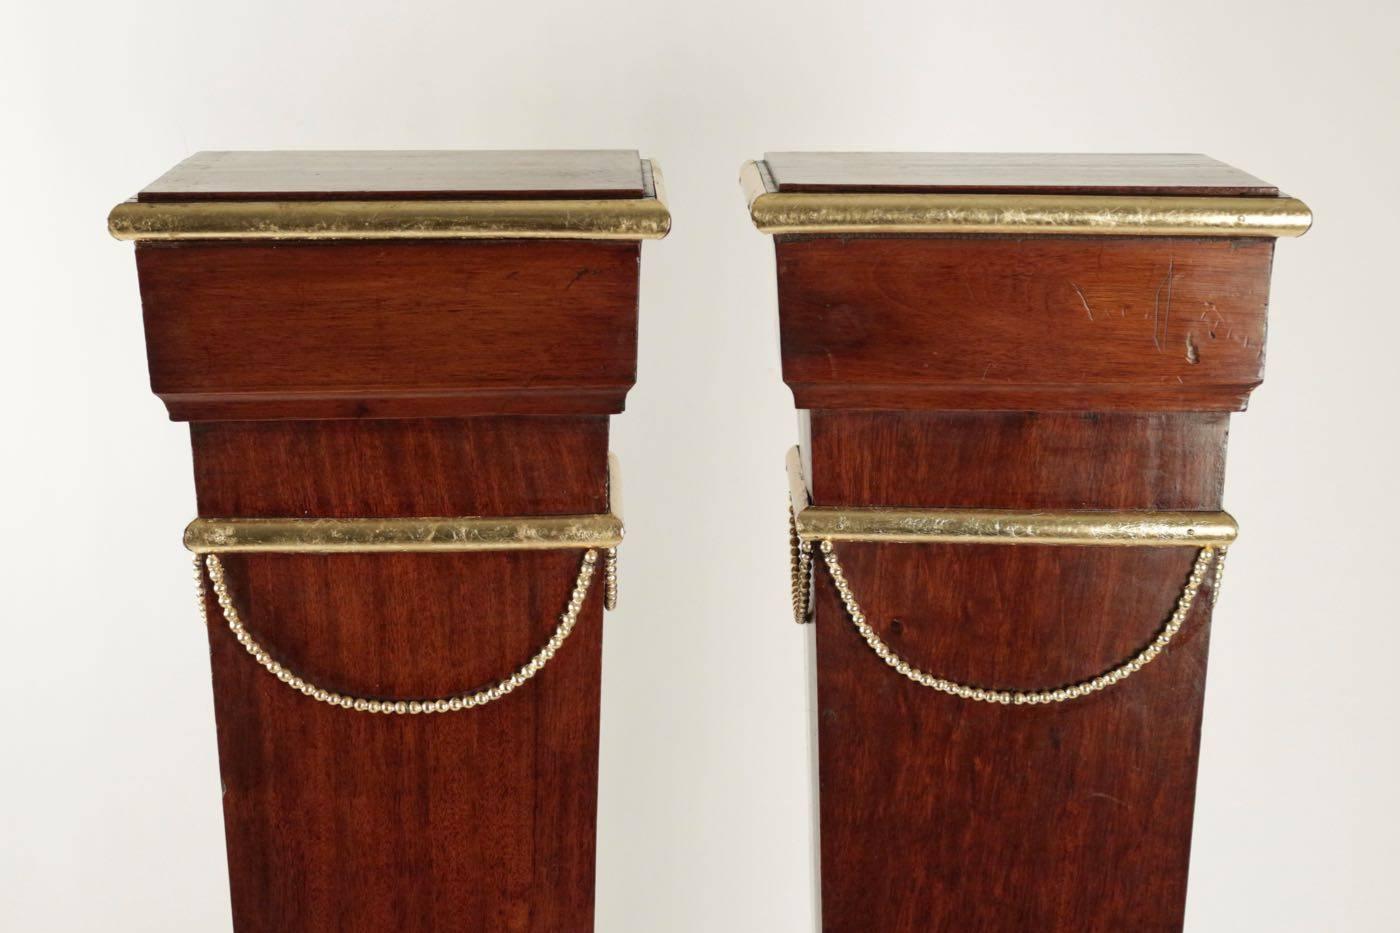 Pair of Sheaths, Consoles, Mahogany, Golden at the Gold Leaf, 19th Century In Good Condition For Sale In Saint-Ouen, FR